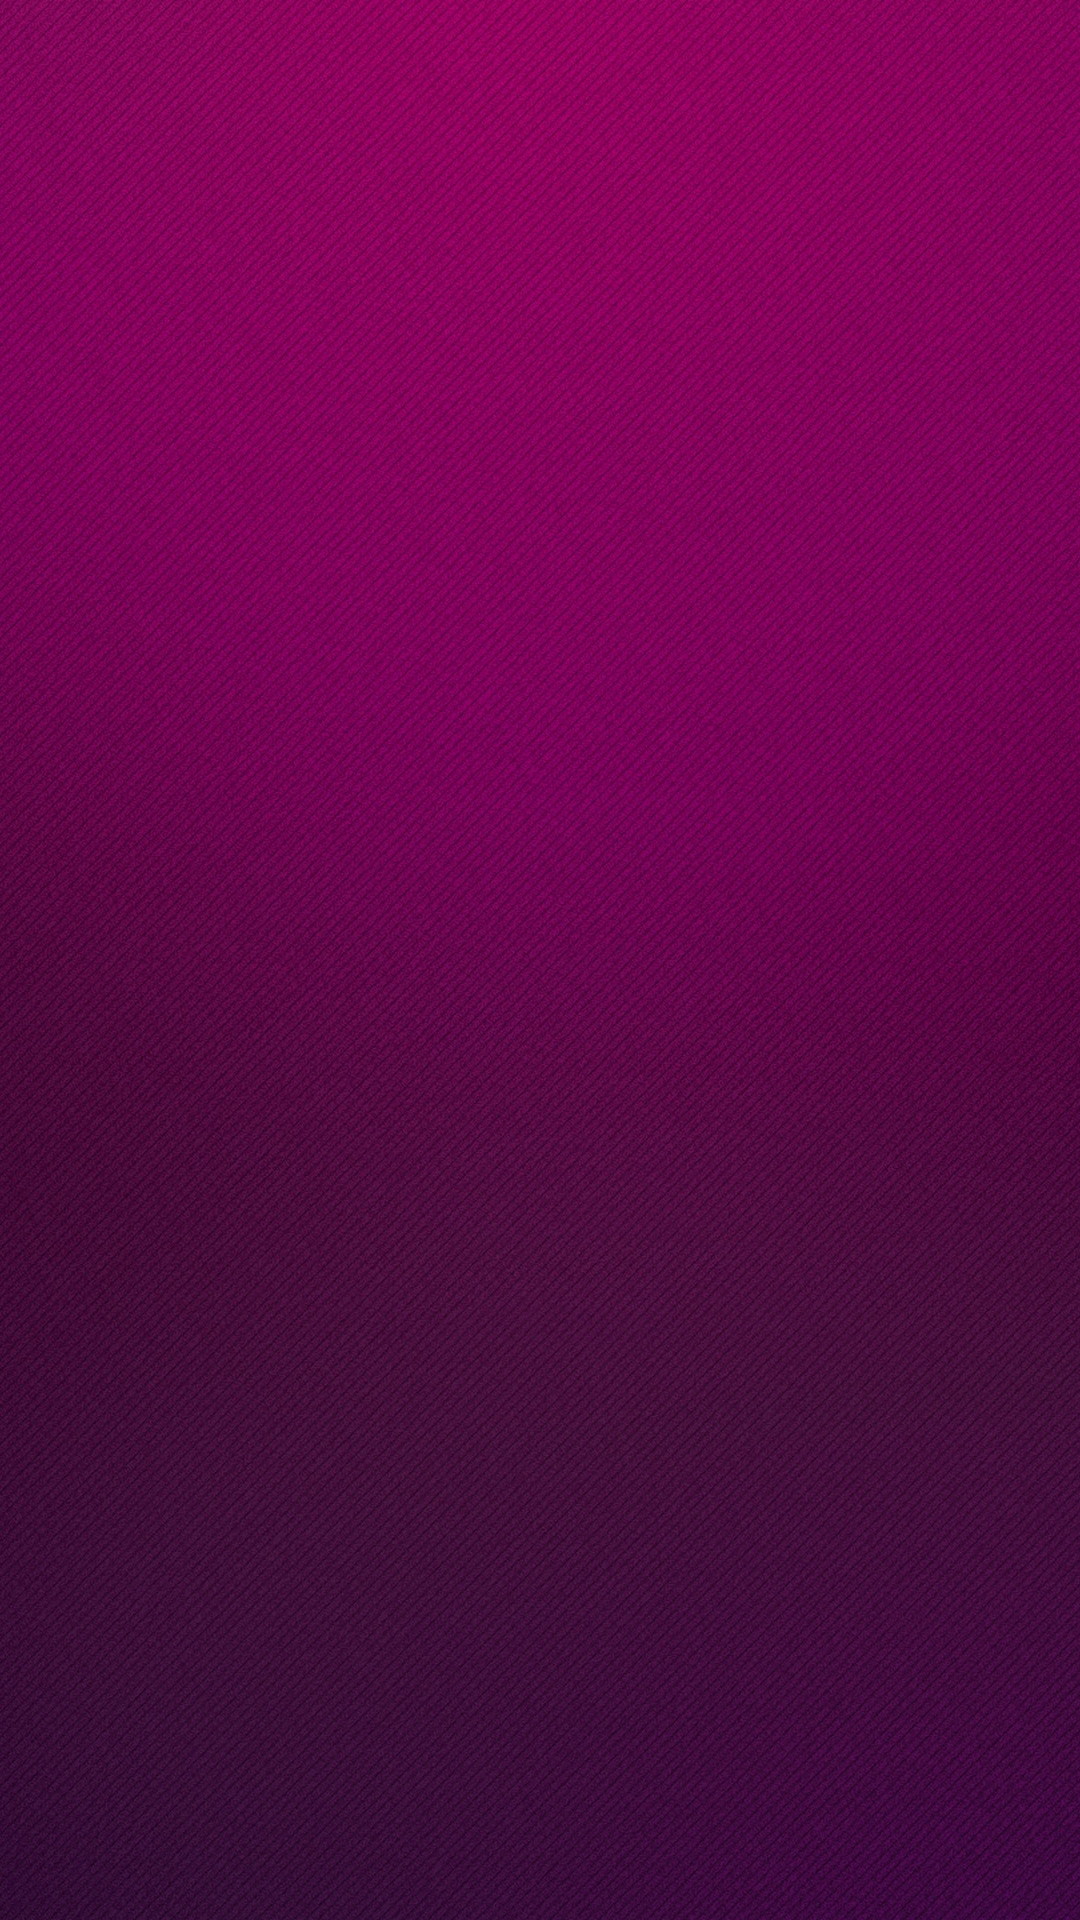 Cool Purple Phone Wallpaper With high-resolution 1080X1920 pixel. Download all Mobile Wallpapers and Use them as wallpapers for your iPhone, Tablet, iPad, Android and other mobile devices